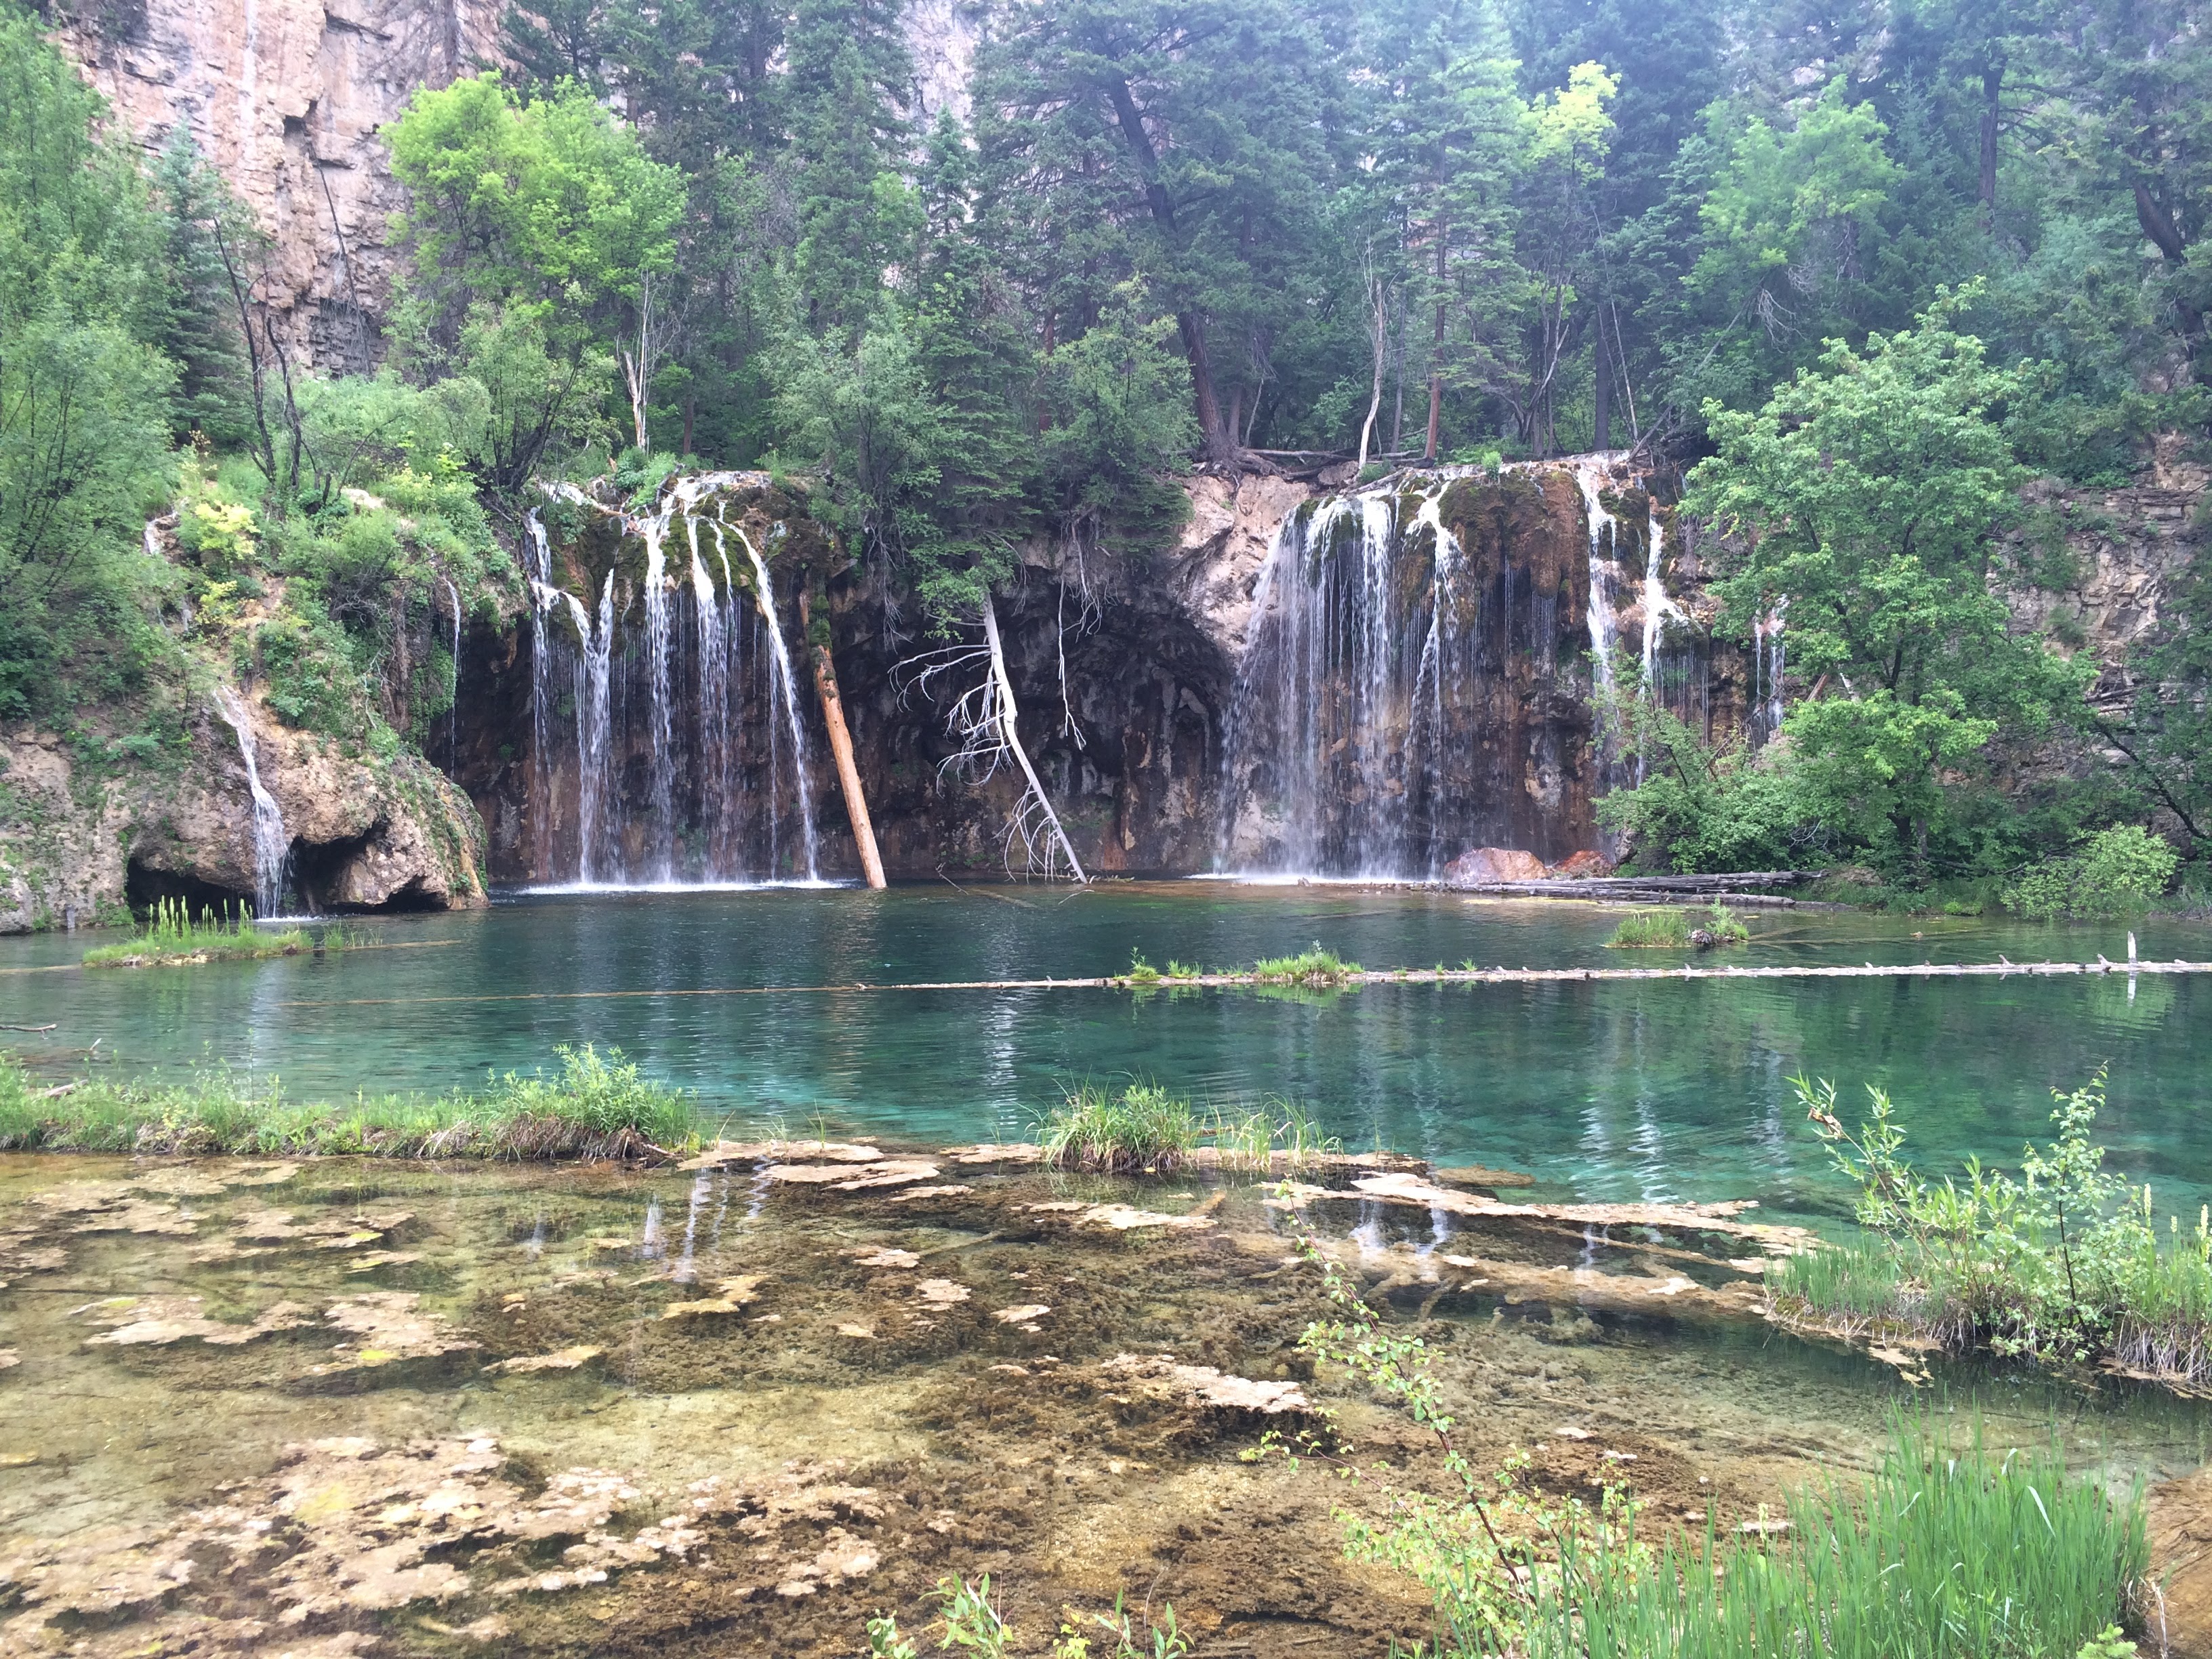 Want to hike Hanging Lake? Soon you may need to buy a permit | 9news.com